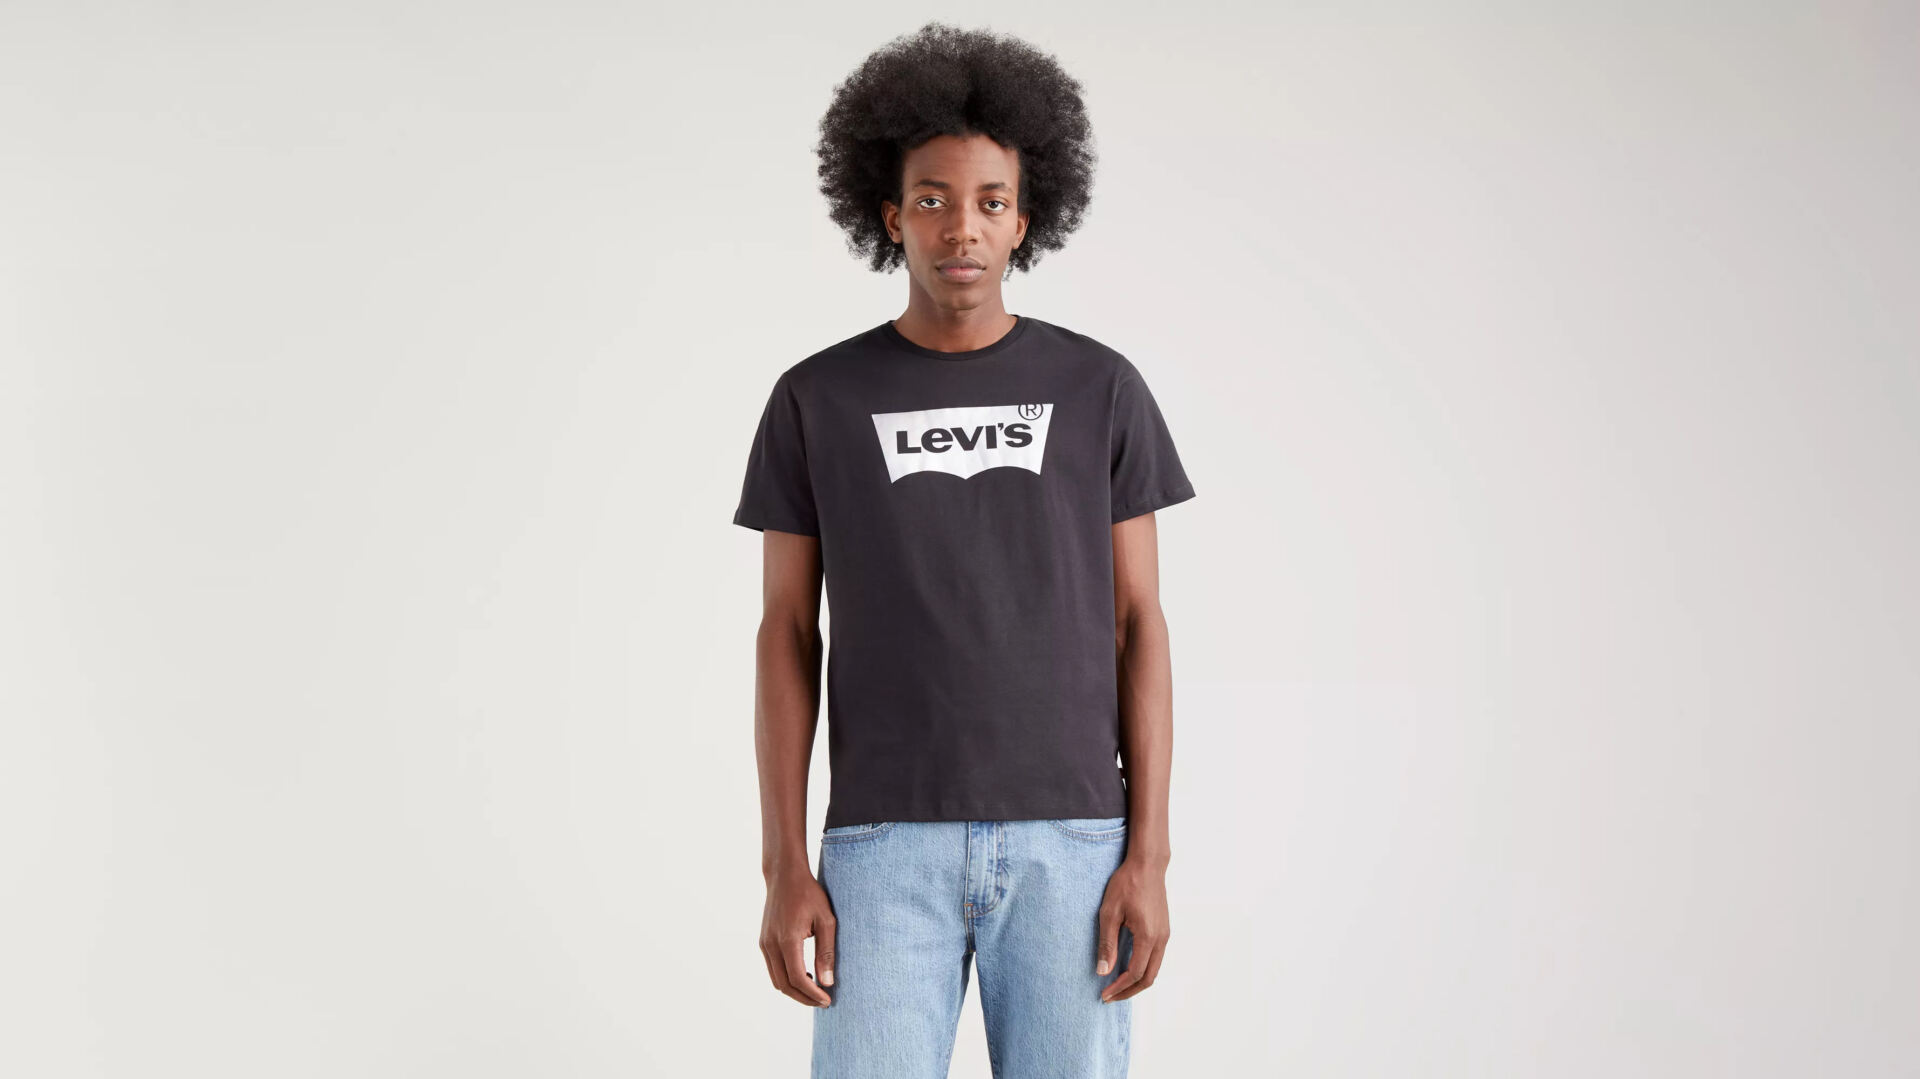 Levis Man T-shirt Graphic Crewneck Tee Black 22491-1048 - Barbopoulos  store, Chania